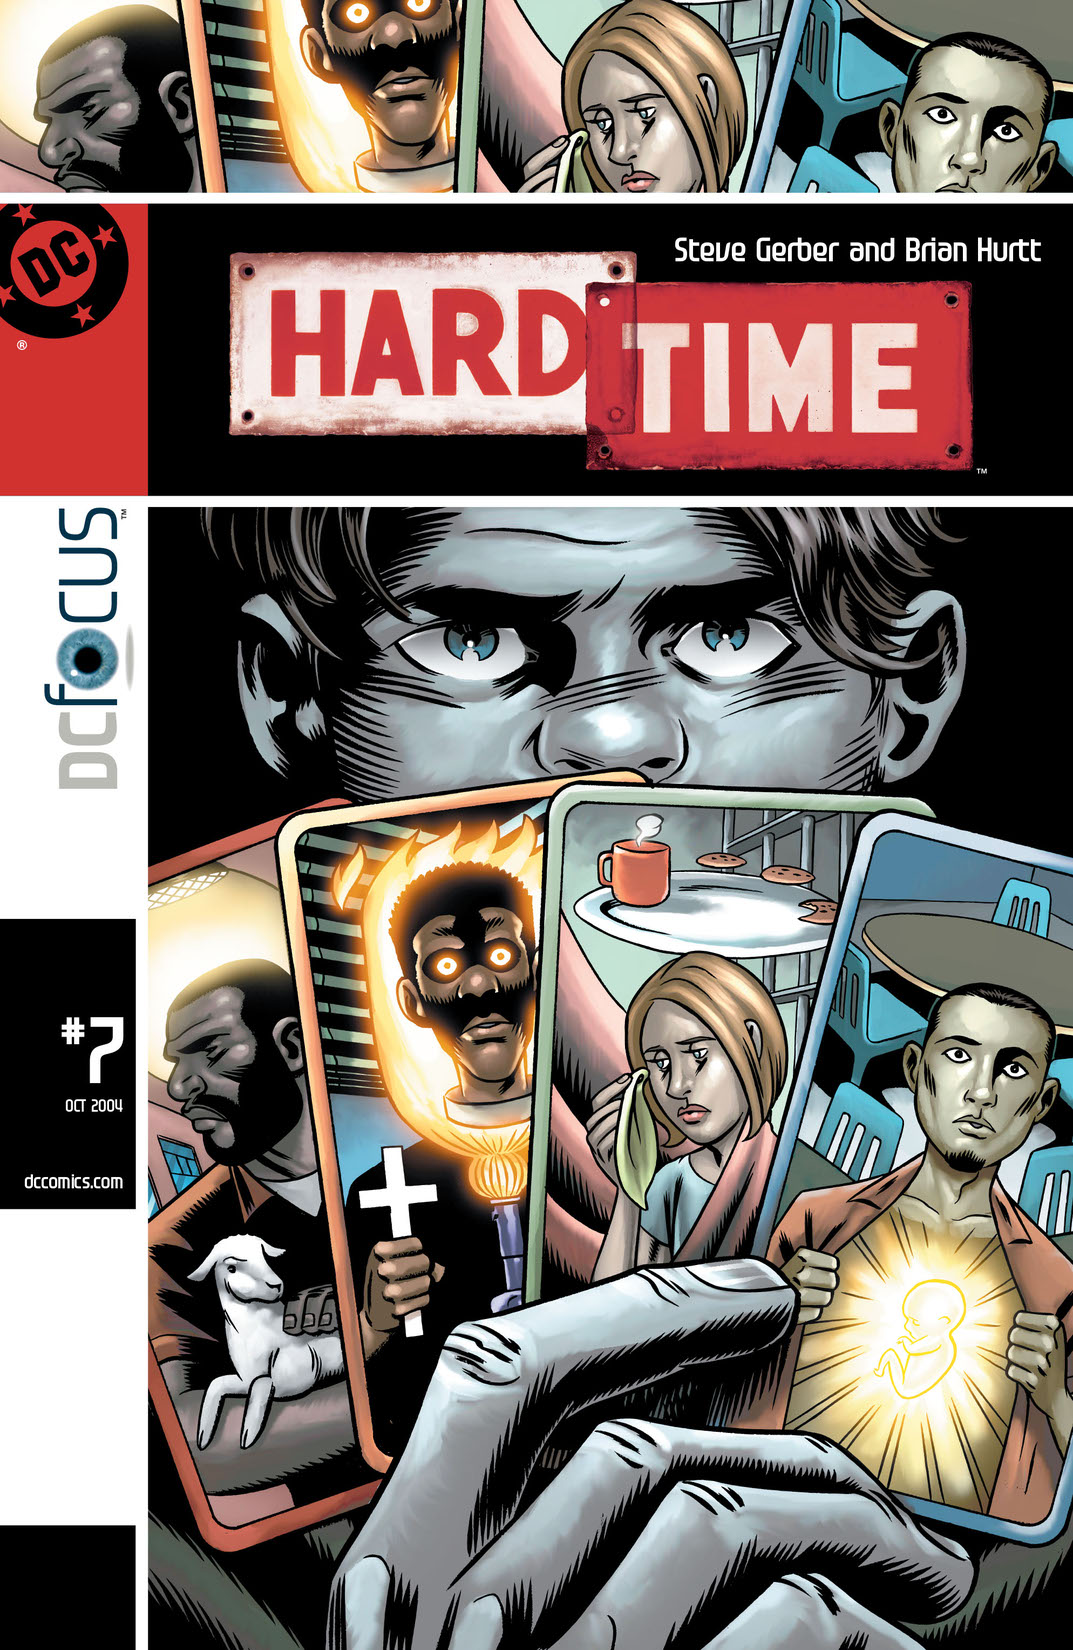 Hard Time #7 preview images